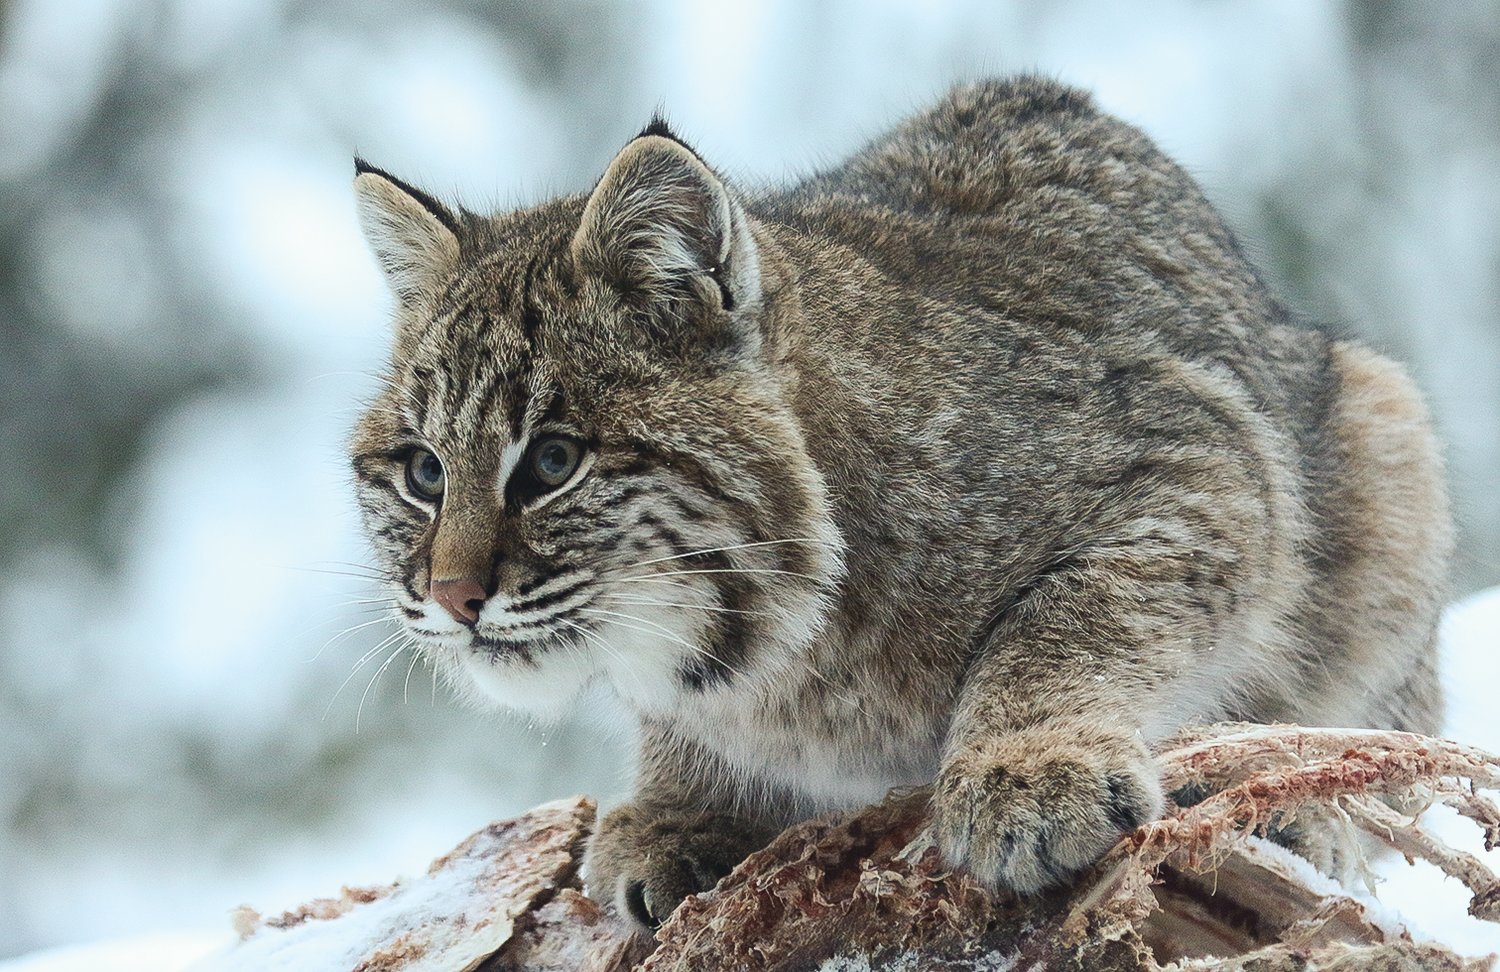 The bobcat who came for dinner stares intently while taking a break from feeding.